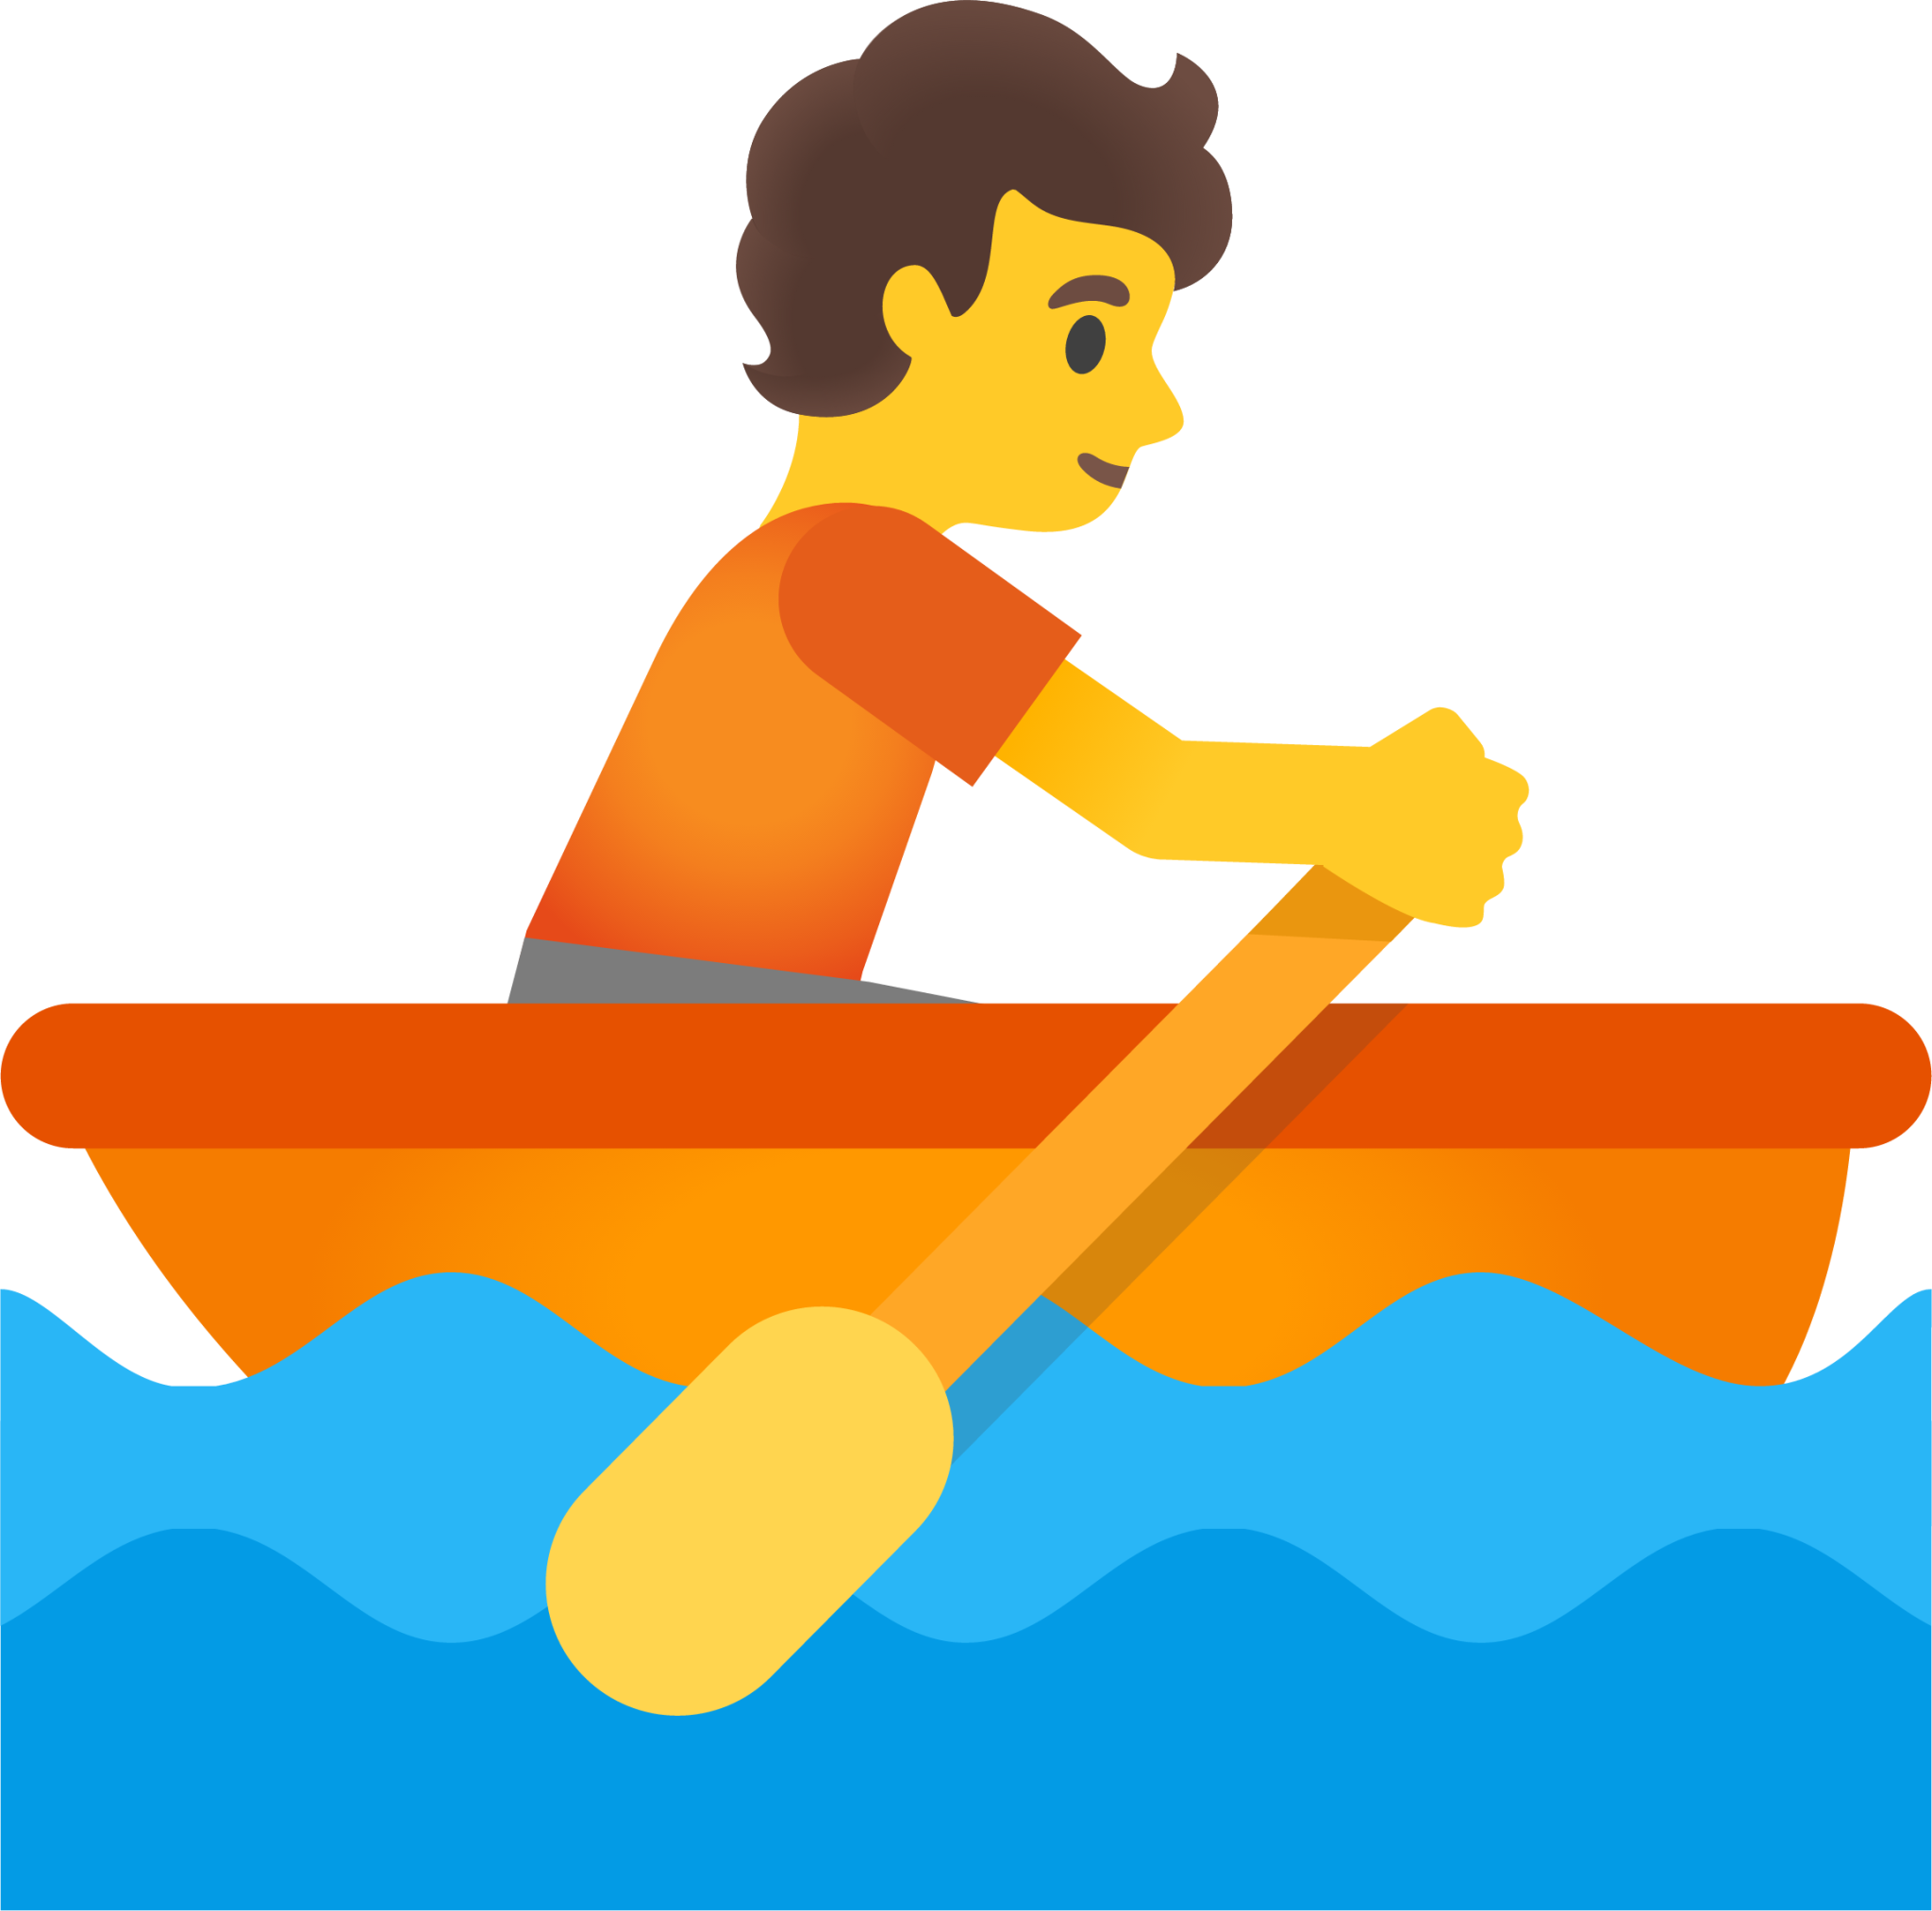 rowing boat clipart